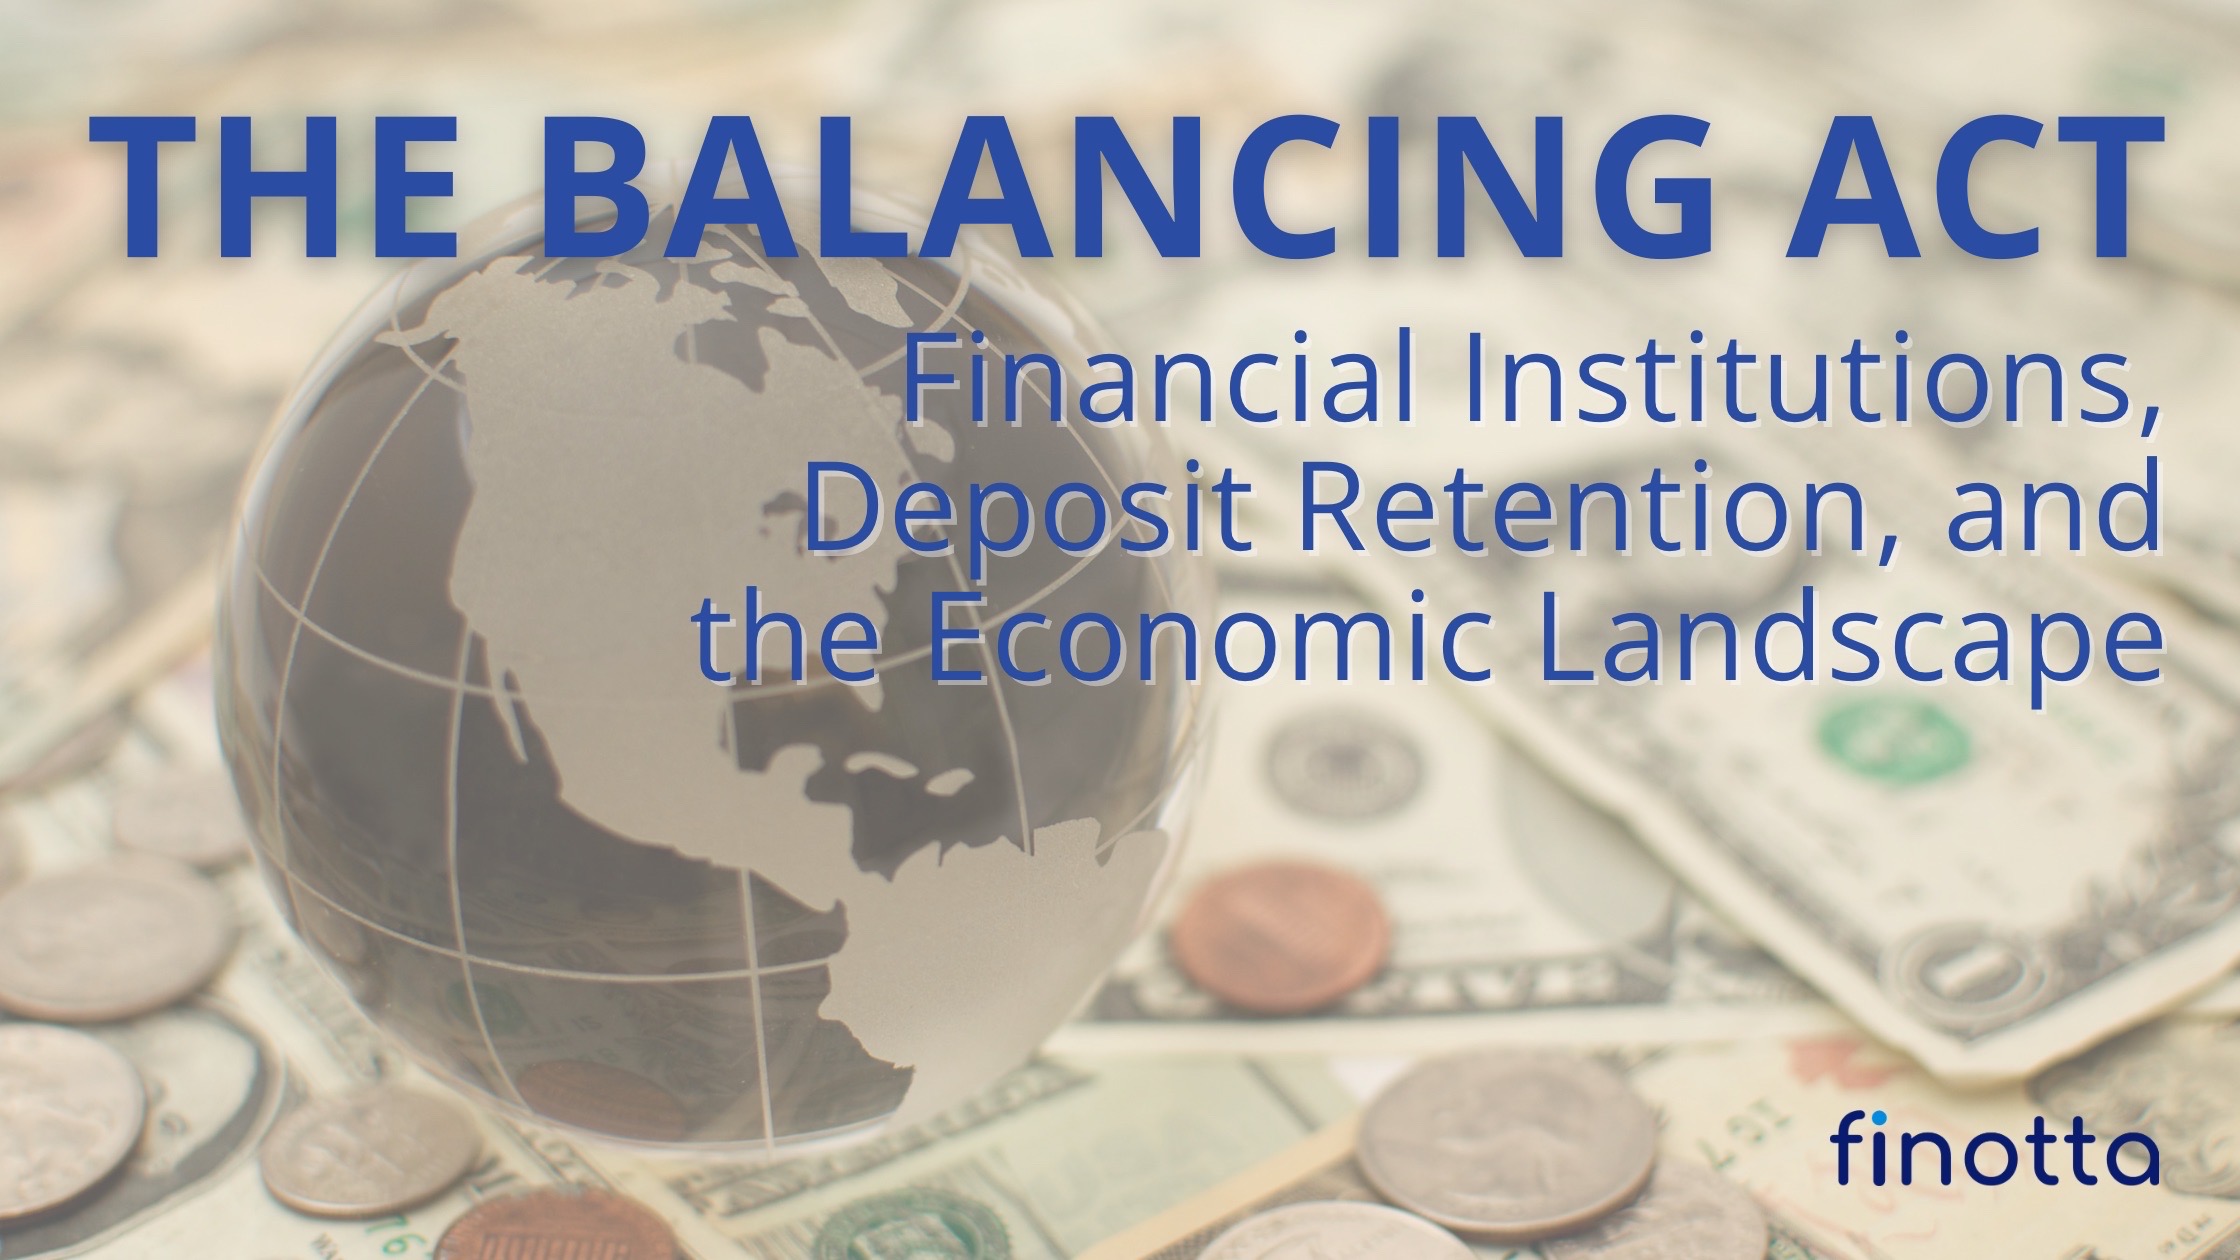 The Balancing Act: Financial Institutions, Deposit Retention, and the Economic Landscape